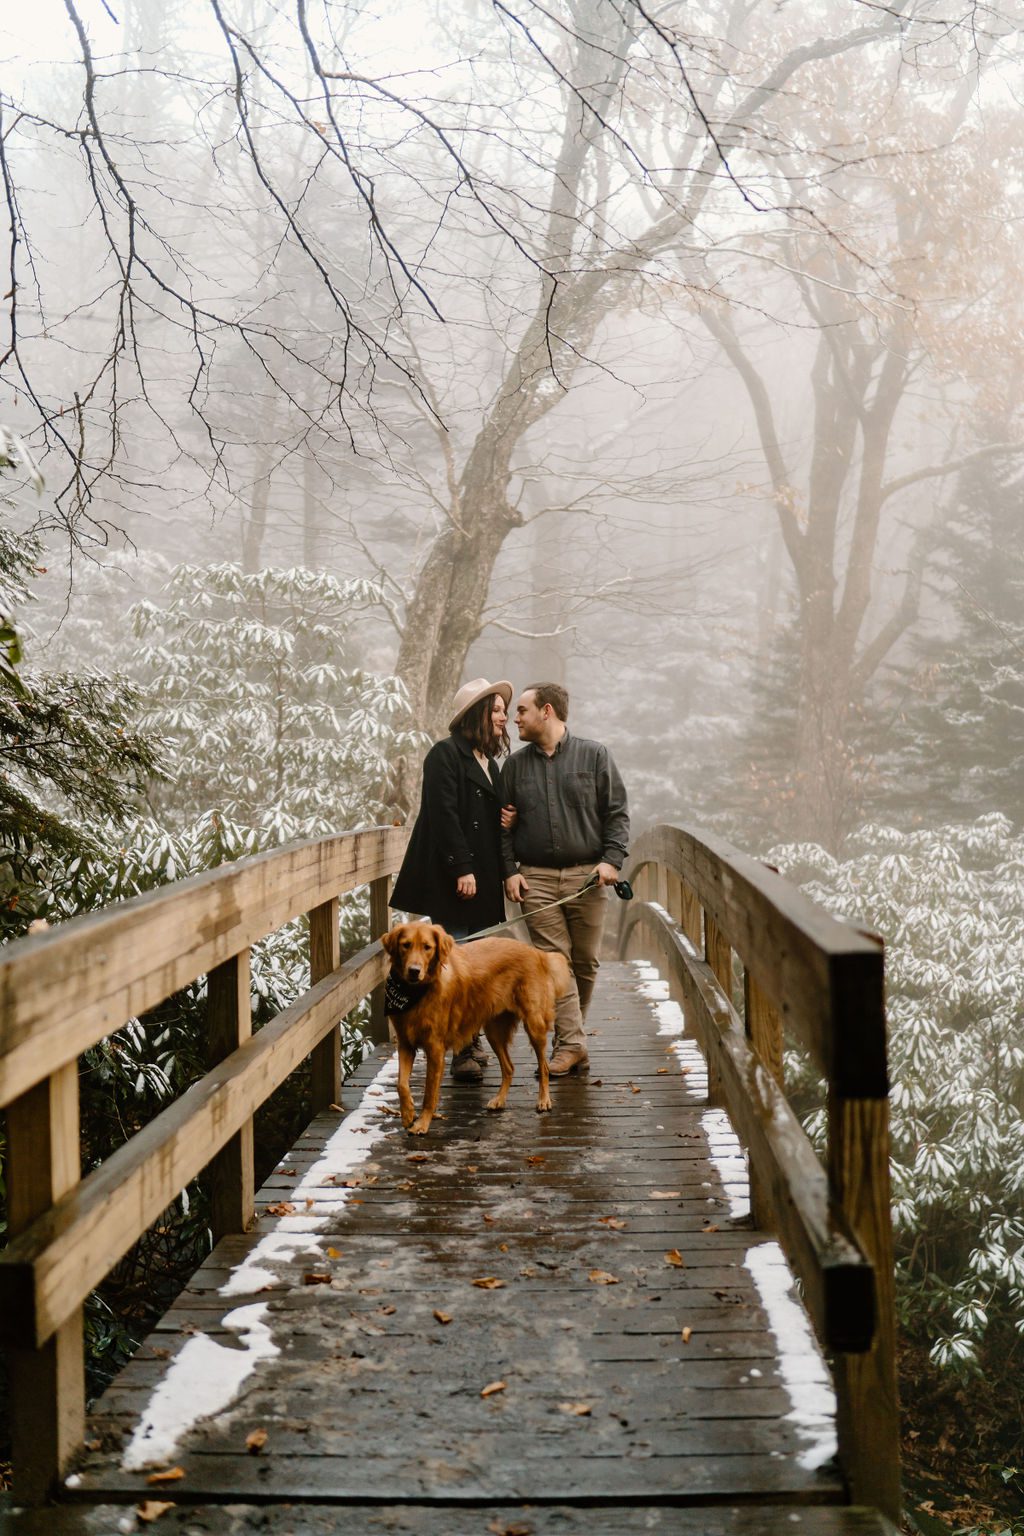 Snowy Winter Engagement Photos At Blue Ridge Parkway